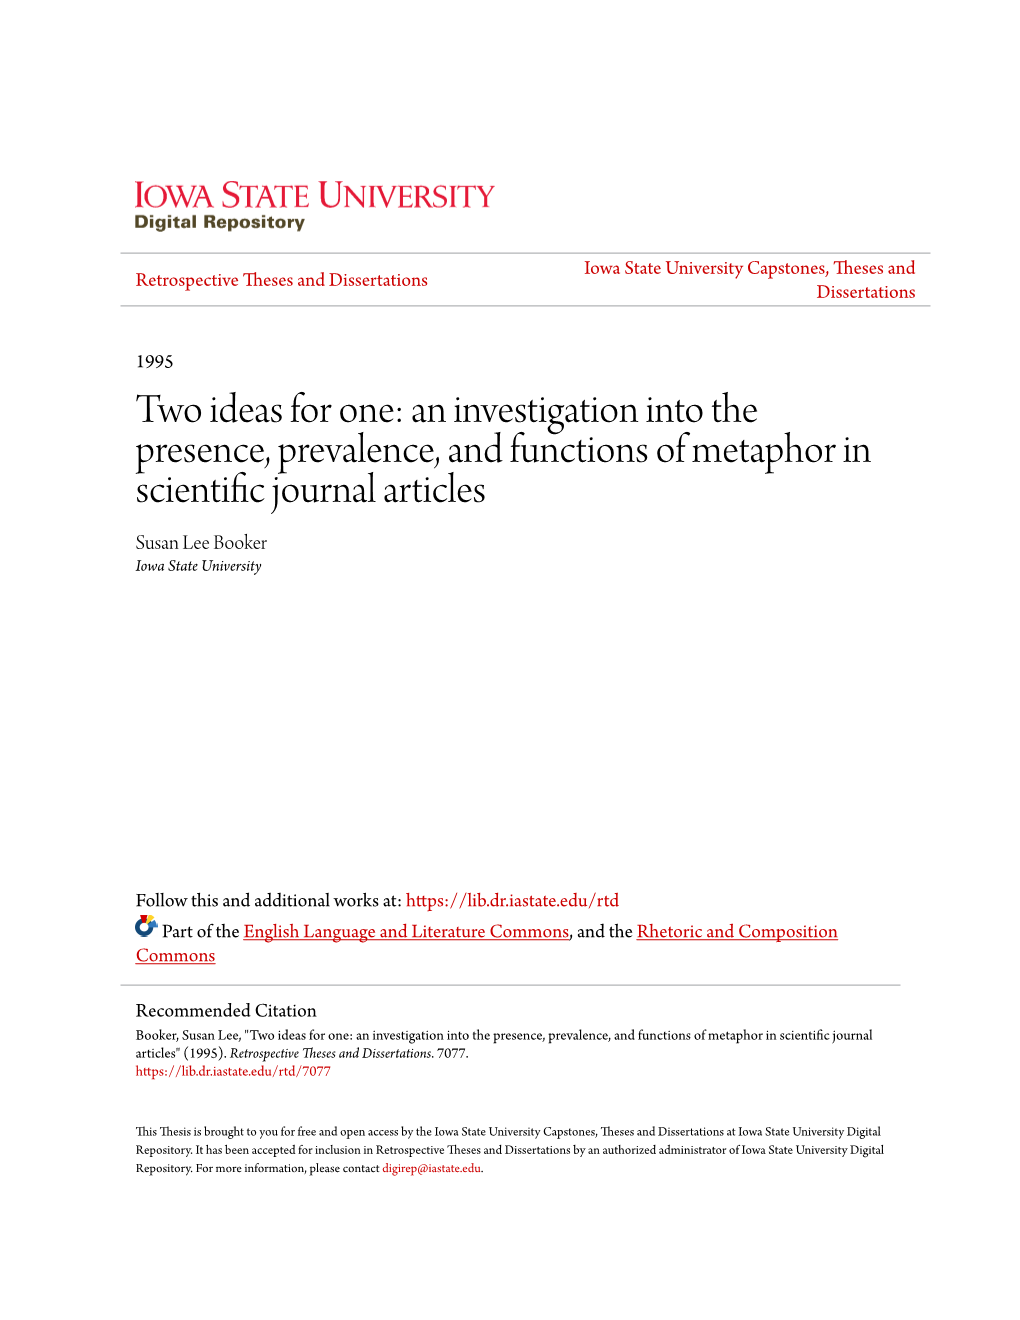 An Investigation Into the Presence, Prevalence, and Functions of Metaphor in Scientific Journal Articles Susan Lee Booker Iowa State University